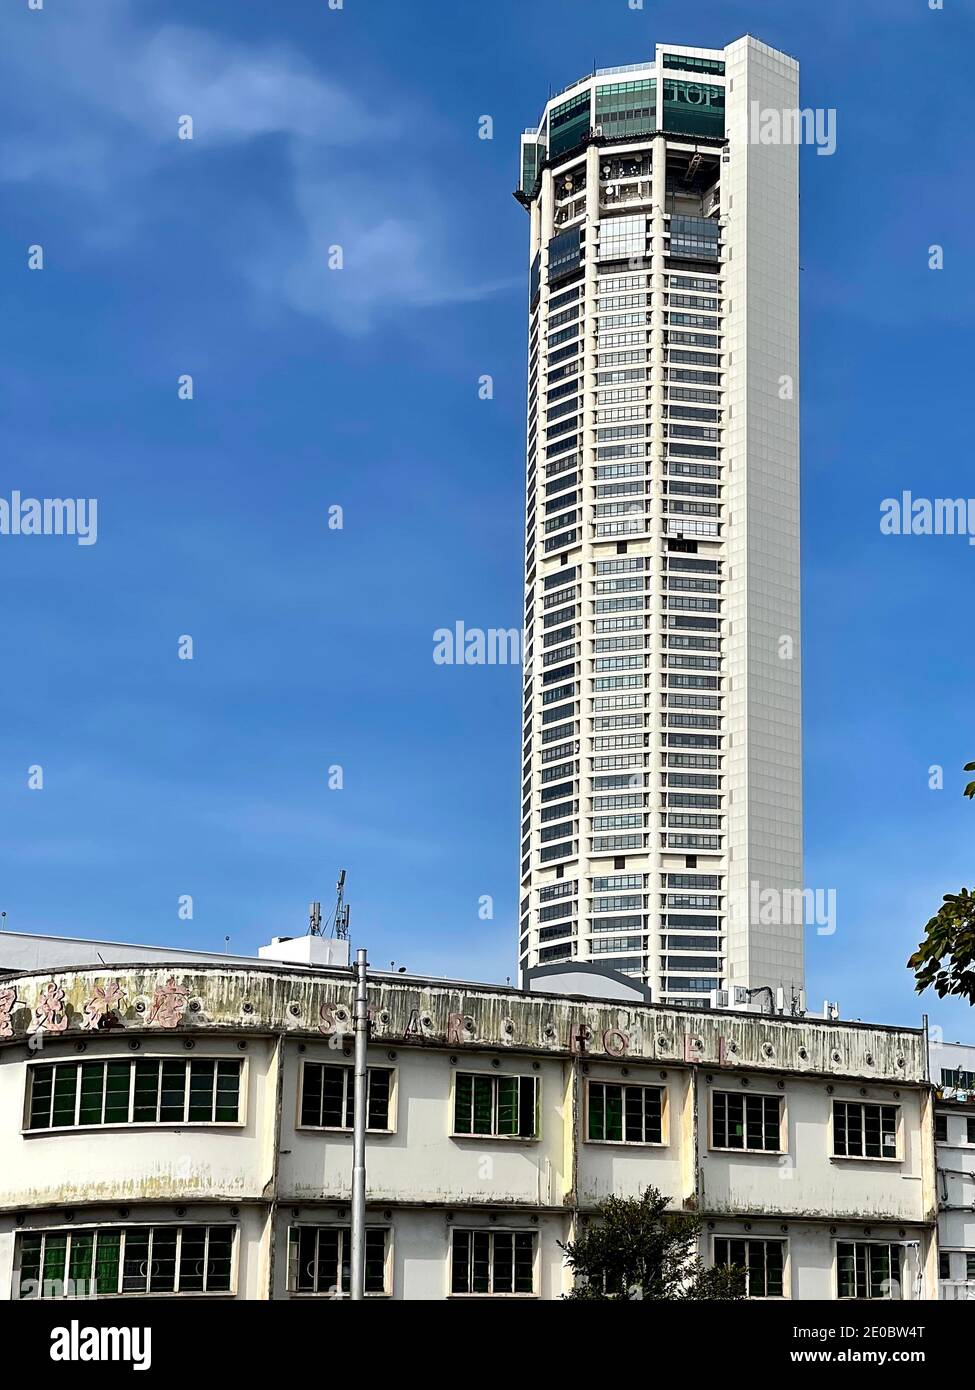 The 66-story iconic building of Komtar Tower dominates the skyline of the Georgetown city, Penang. It is the tallest building in Penang Island. Stock Photo